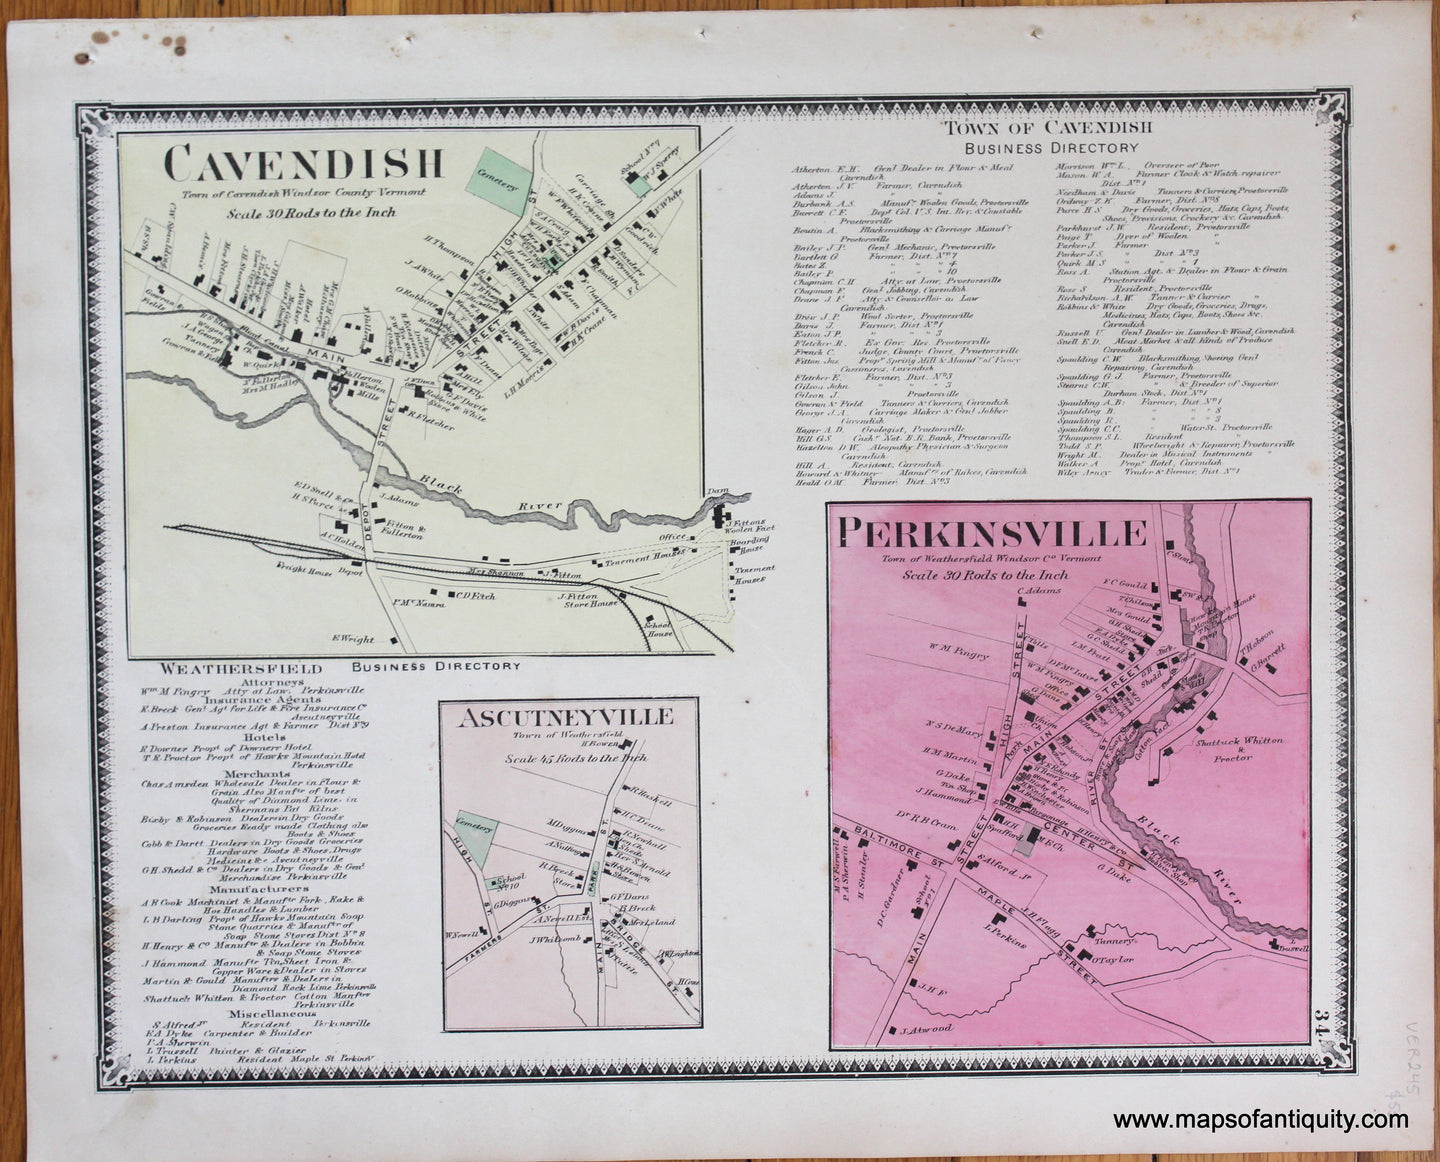 Antique-Map-Vermont-VT-Windsor-County-Town-Cavendish-Ascutneyville-Perkinsville-Beers-1869-1860s-1800s-19th-Century-Maps-of-Antiquity